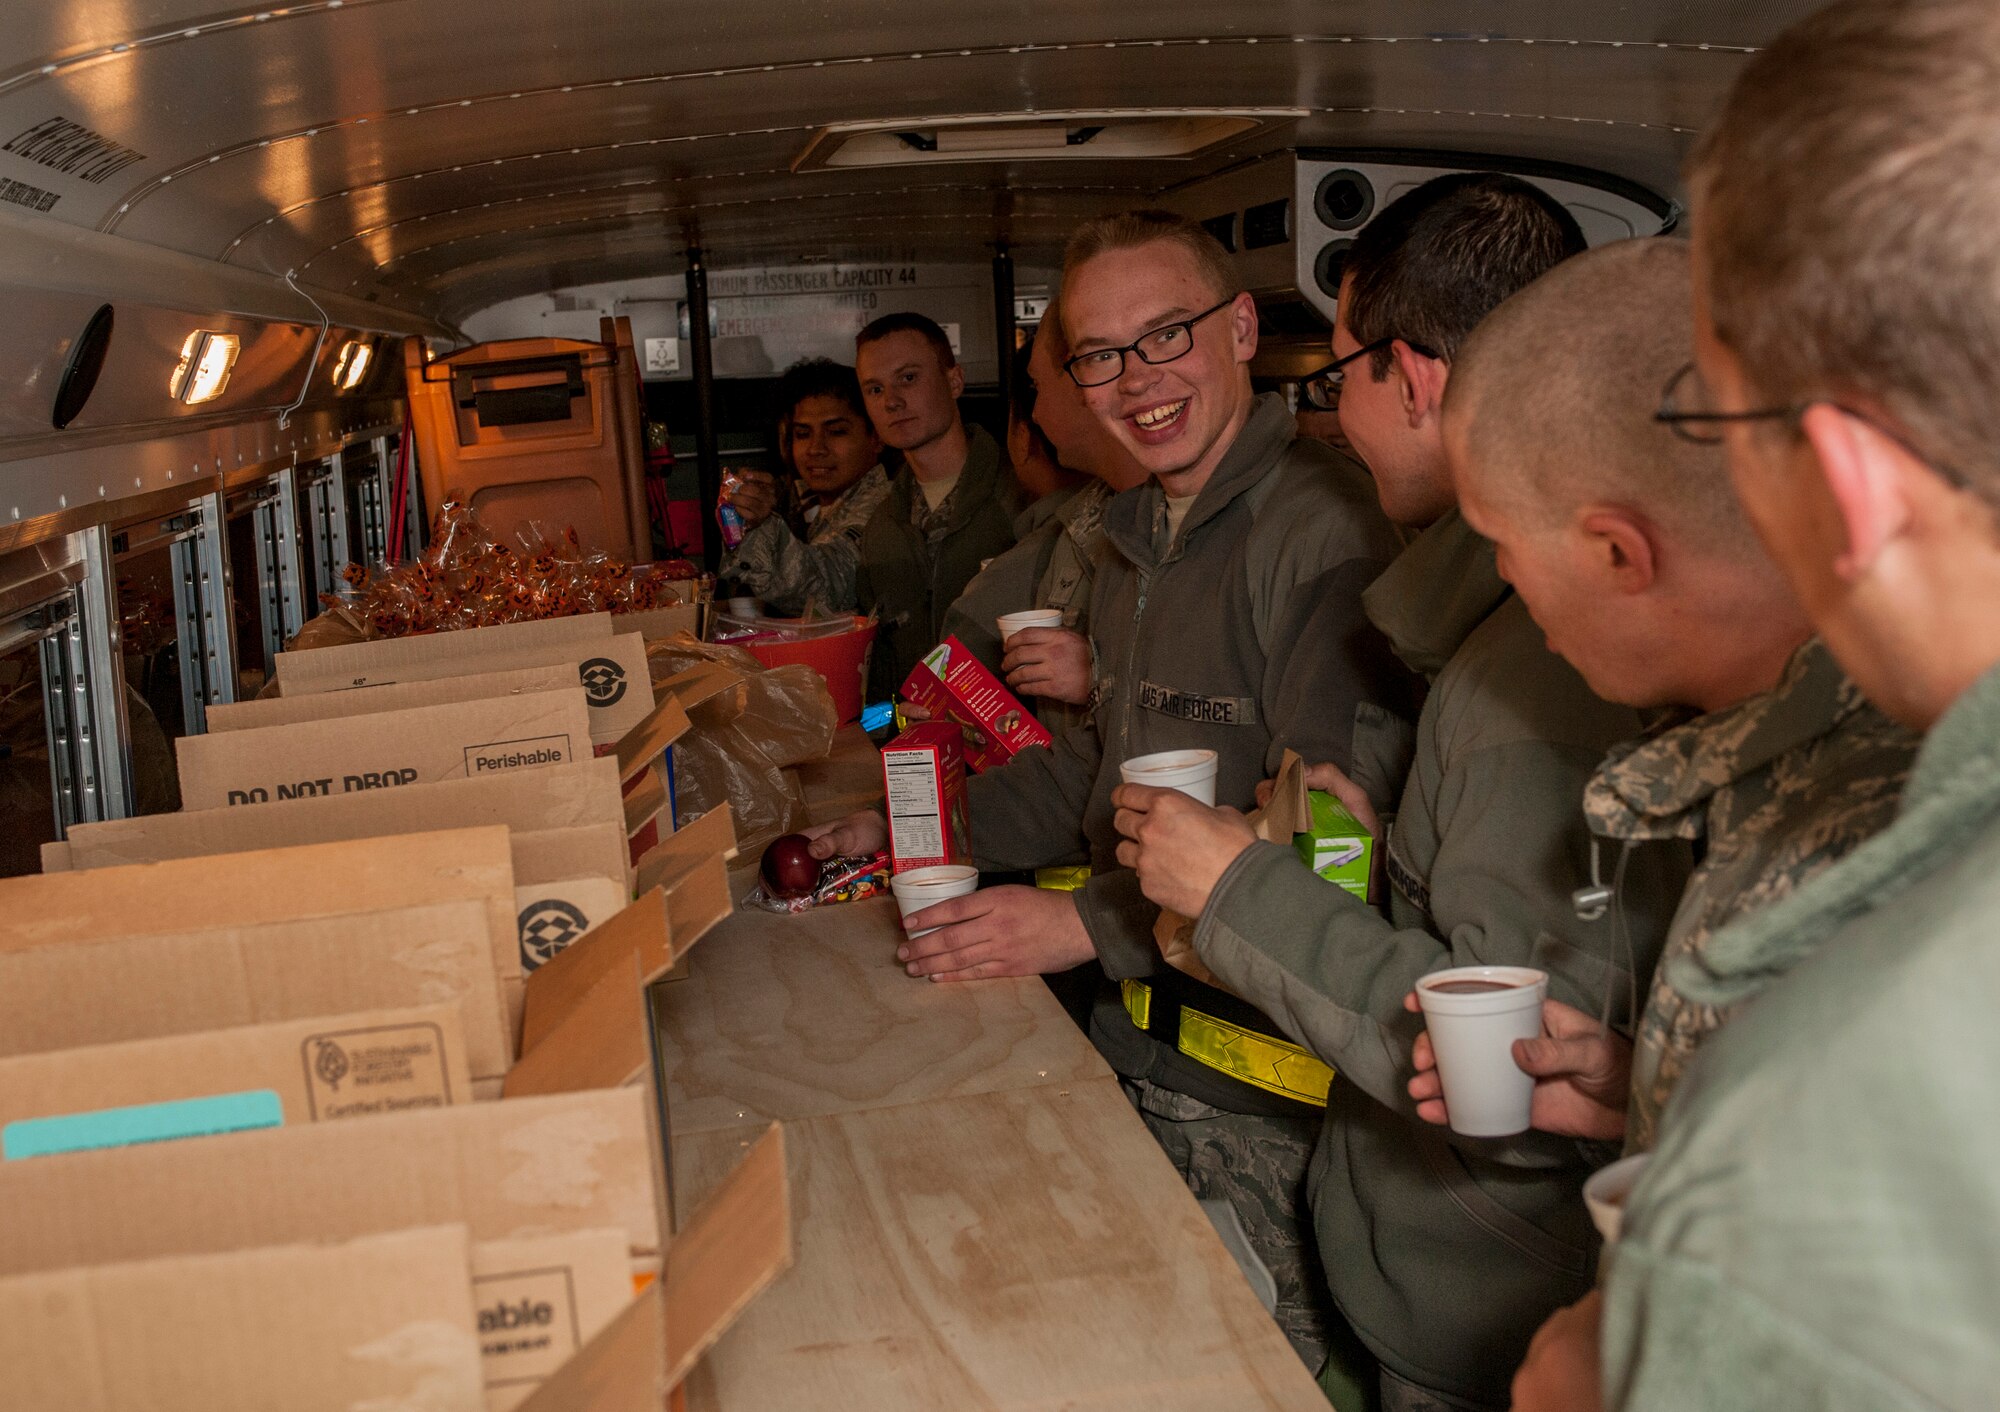 Airman 1st Class Robert Jones, 5th Aircraft Maintenance Squadron crew chief, laughs with his fellow crew coworkers while on the “cookie bus” at Minot Air Force Base, N.D., Oct. 31, 2013. The joy of the Airmen who were visited, and those who volunteered to deliver the late night treats, was evident in their faces. (U.S. Air Force photo/Senior Airman Stephanie Sauberan)